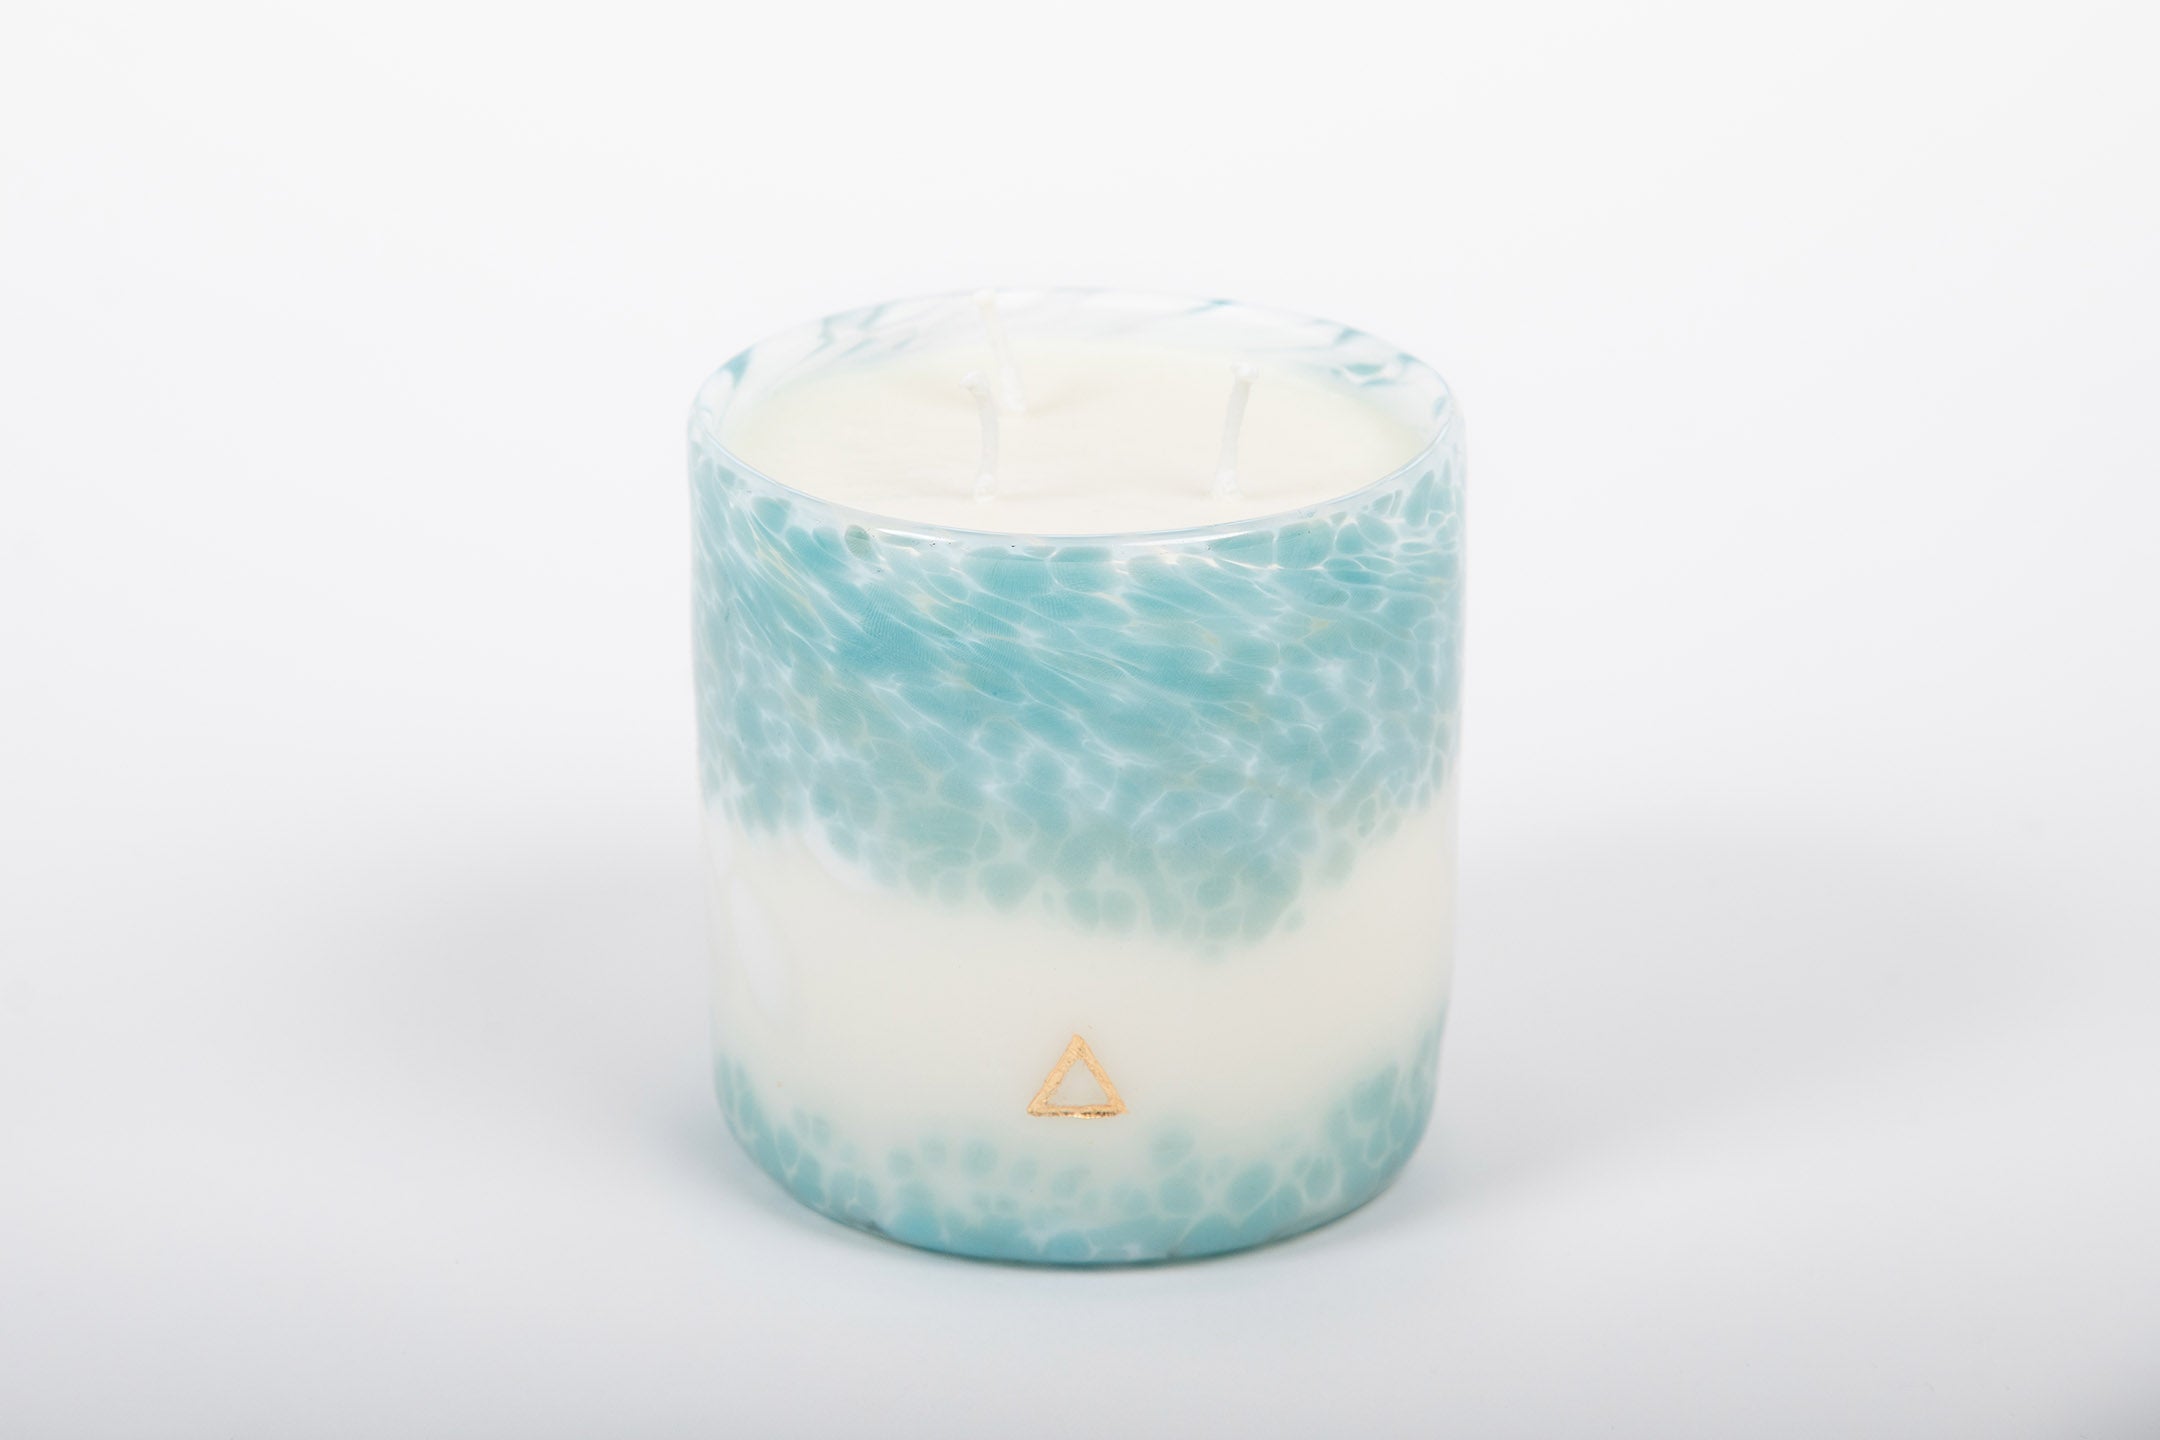 Peace Steel Turquoise & White Hand Blown Glass Candle from Life's About Change Light Collection